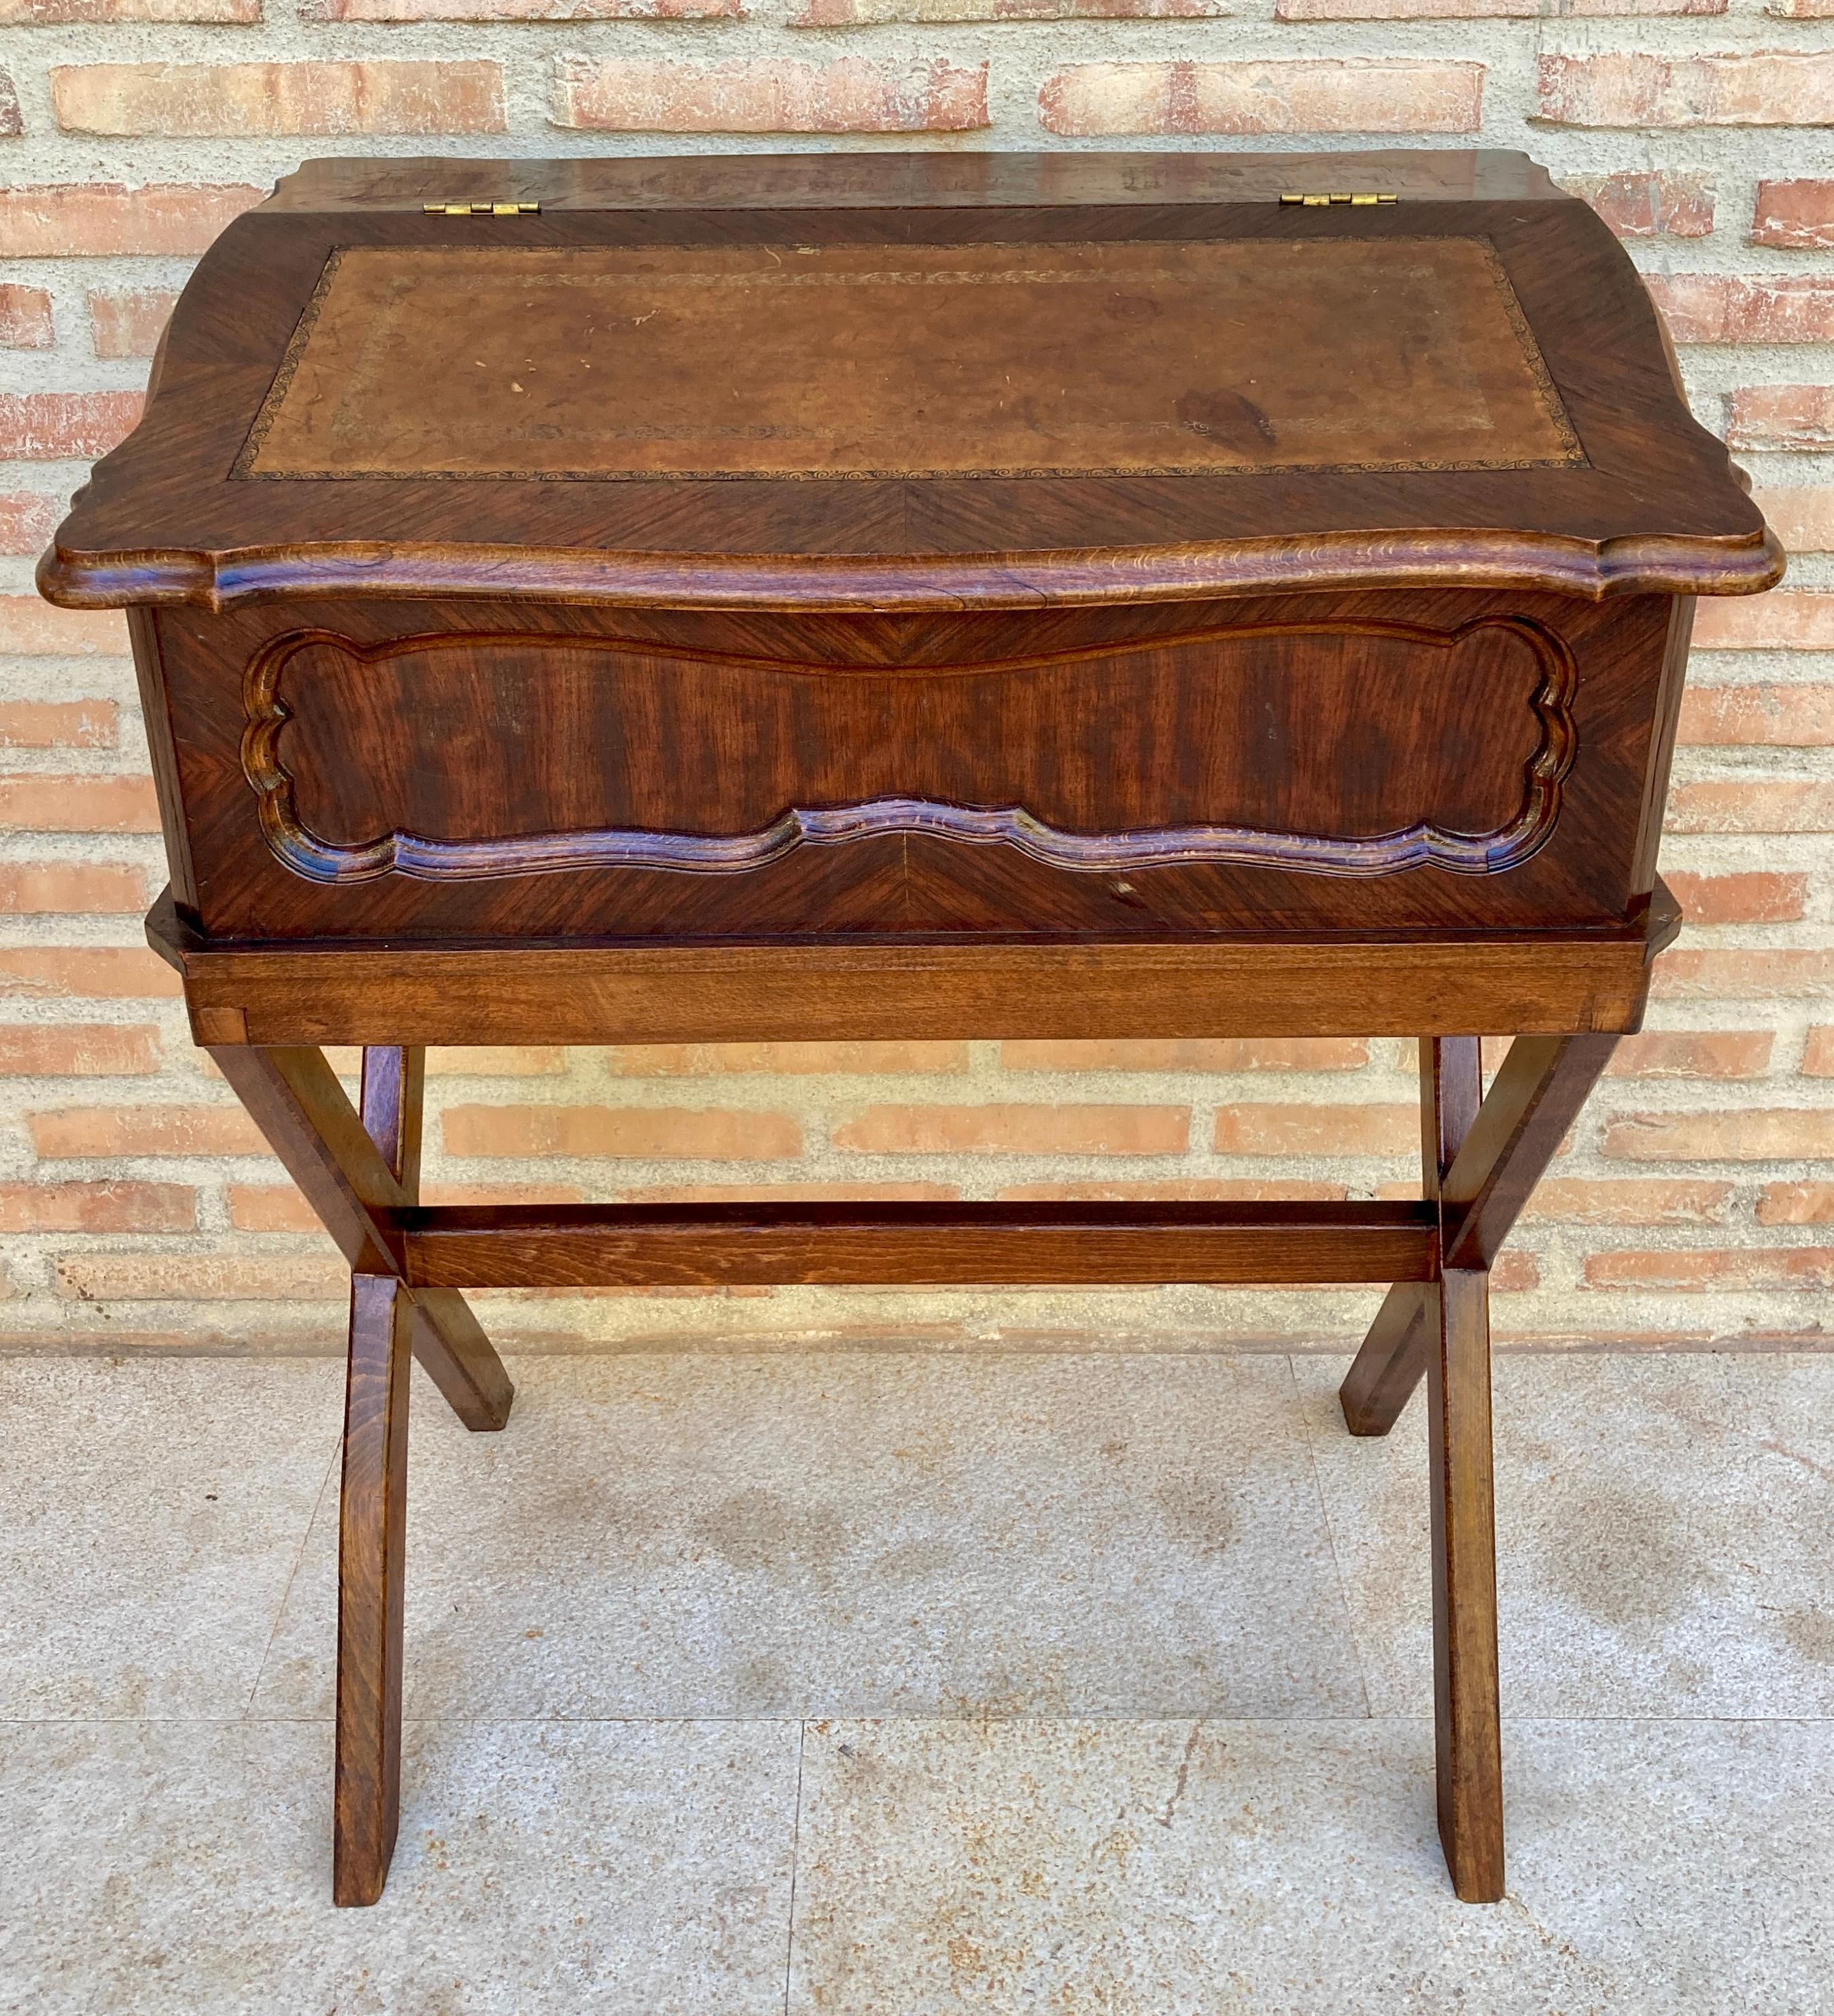 The early 20th century French secretaire was made of walnut. 
Called secretaire en abbatant by the French, in reference to the sloping-front drop-down desk surface, this particular example features the classic leather writing mat in glorious relief